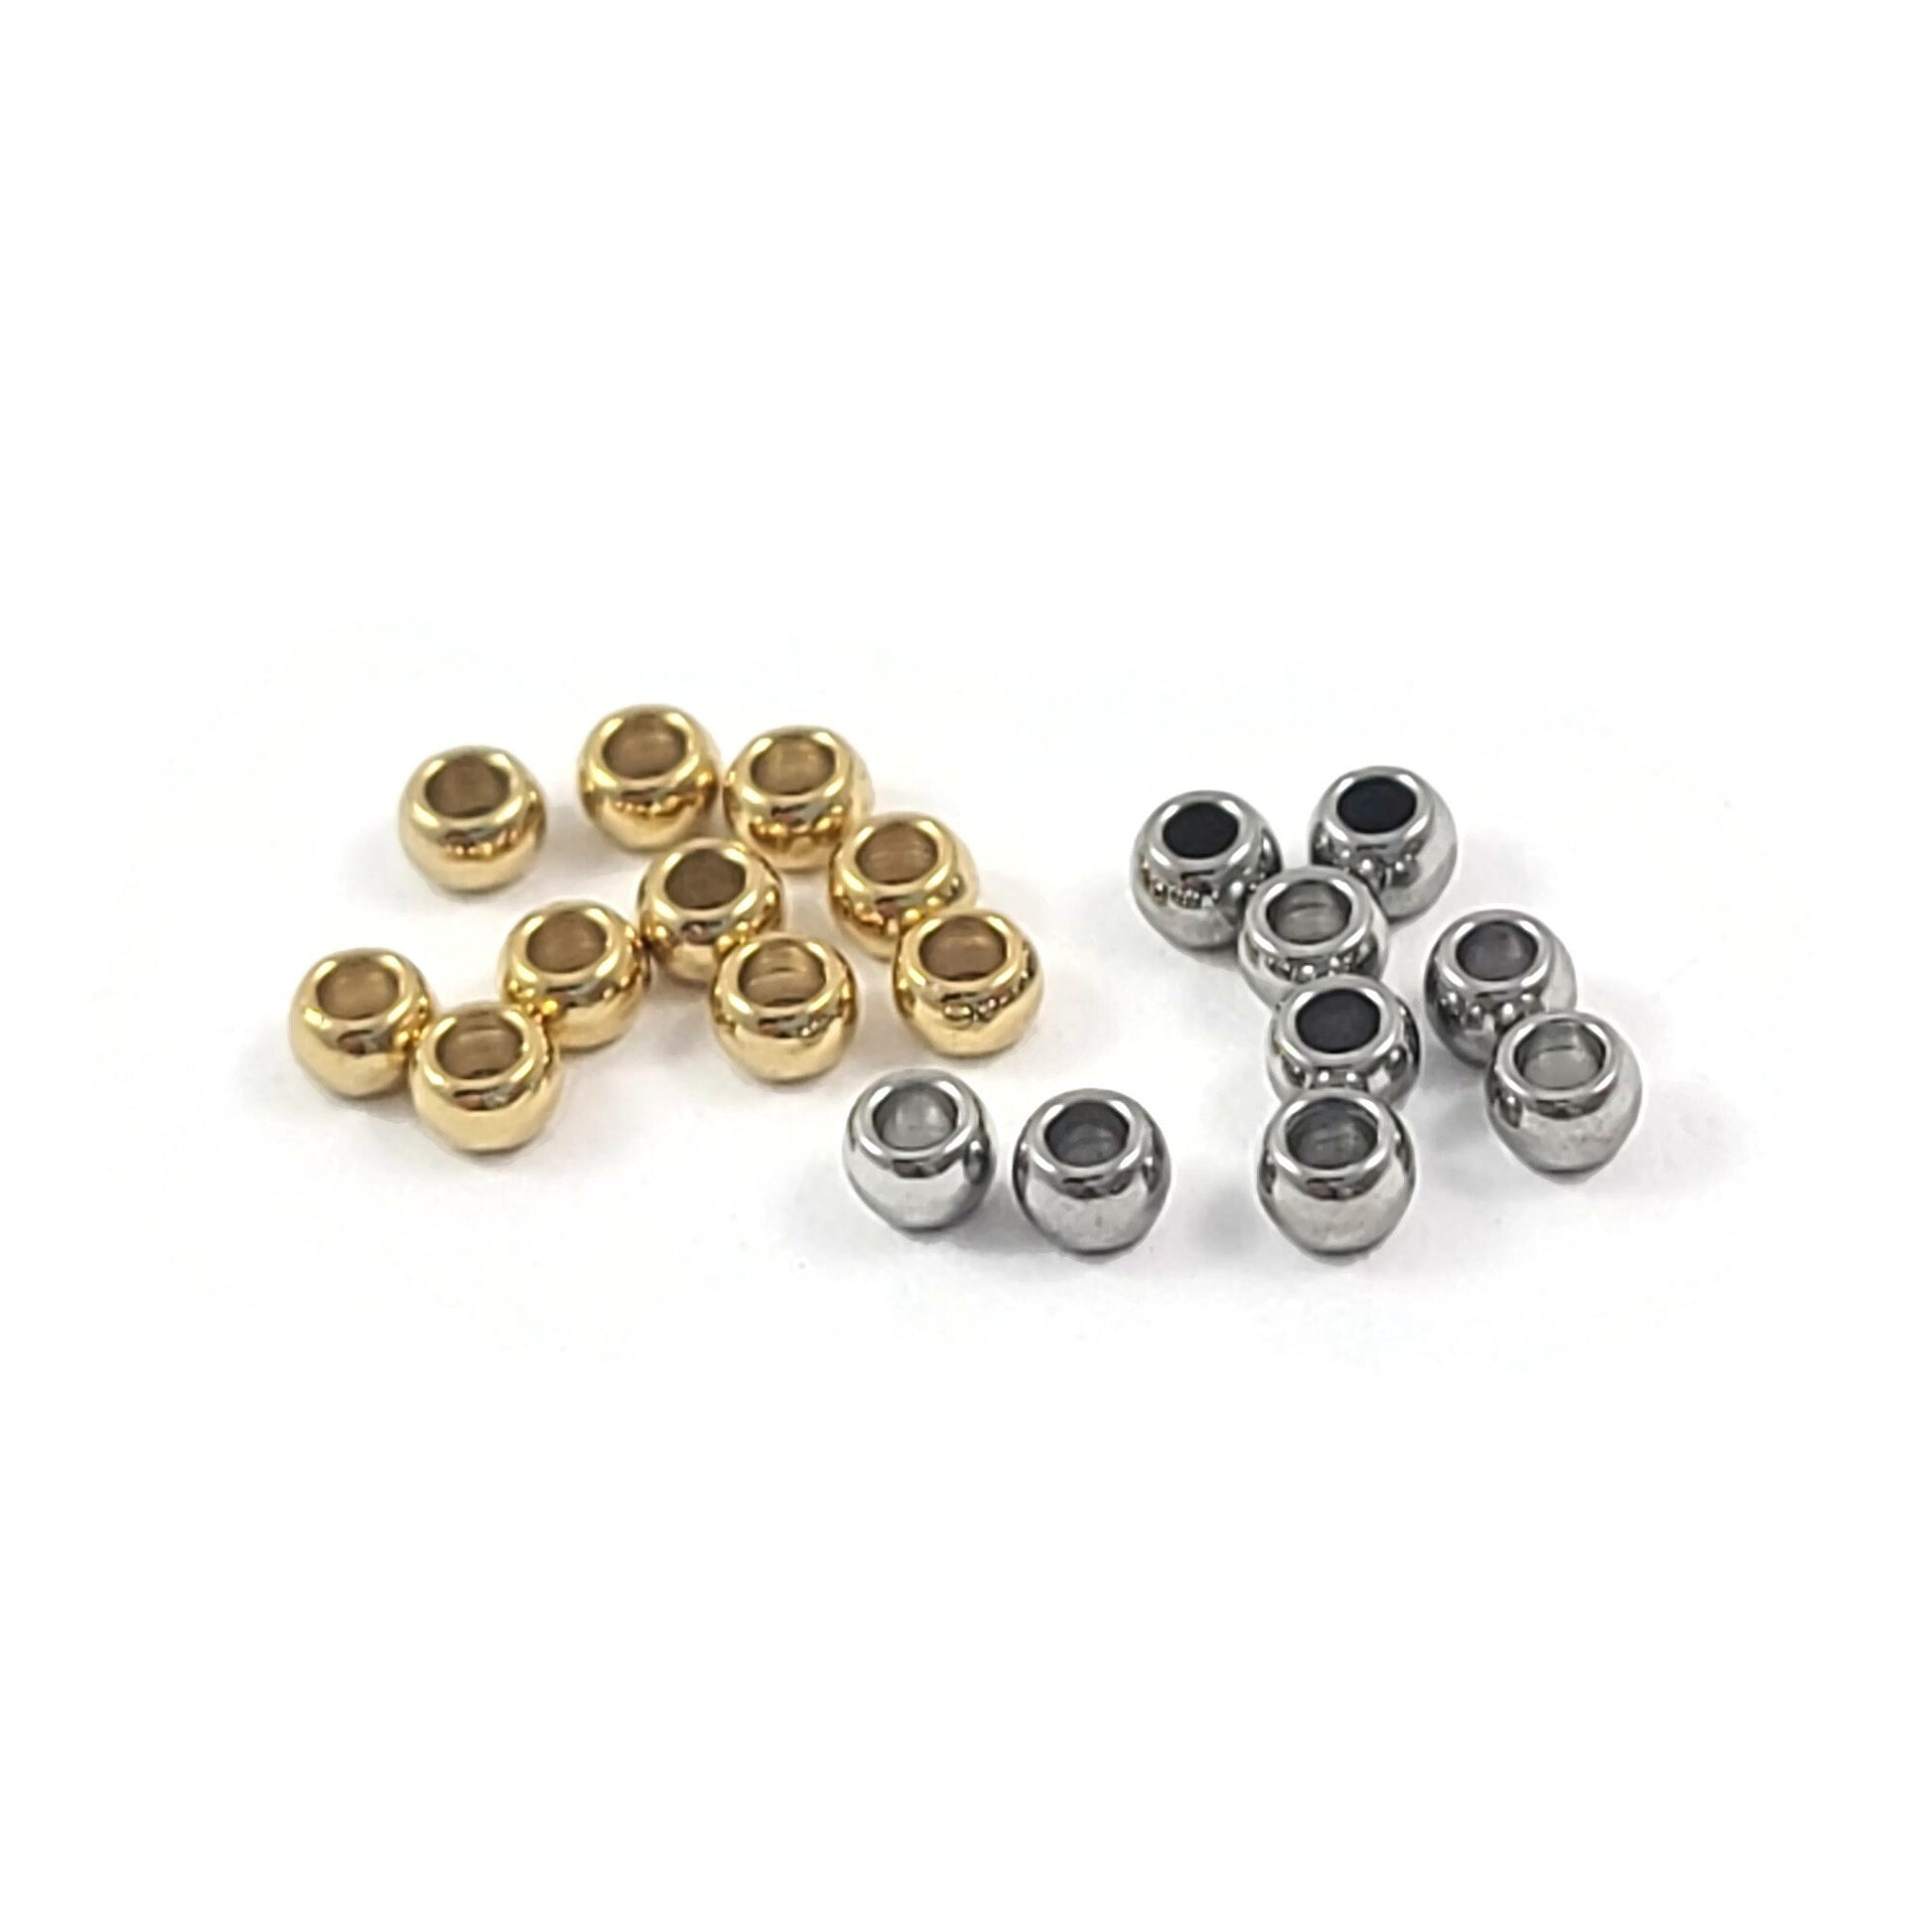 Surgical stainless steel crimp beads, Hypoallergenic jewelry making findings, Gold silver rondelle